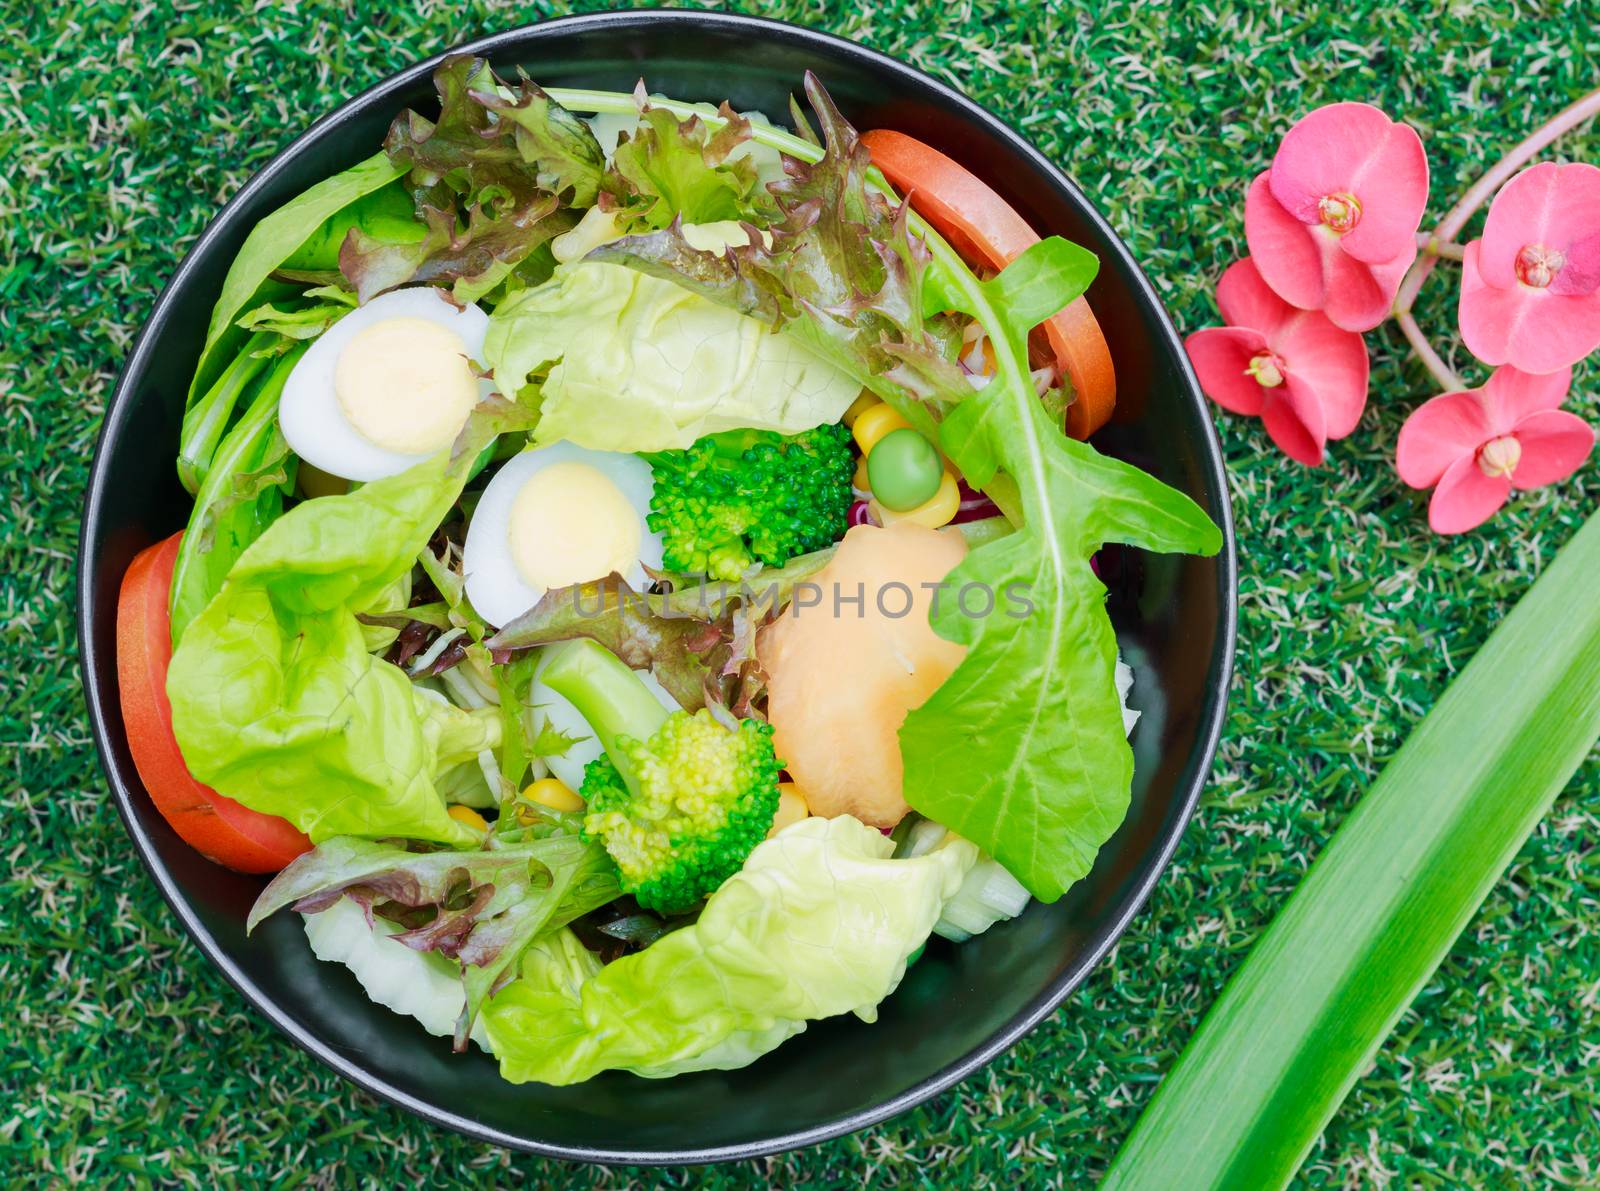 Mixed salad with quail eggs by AEyZRiO